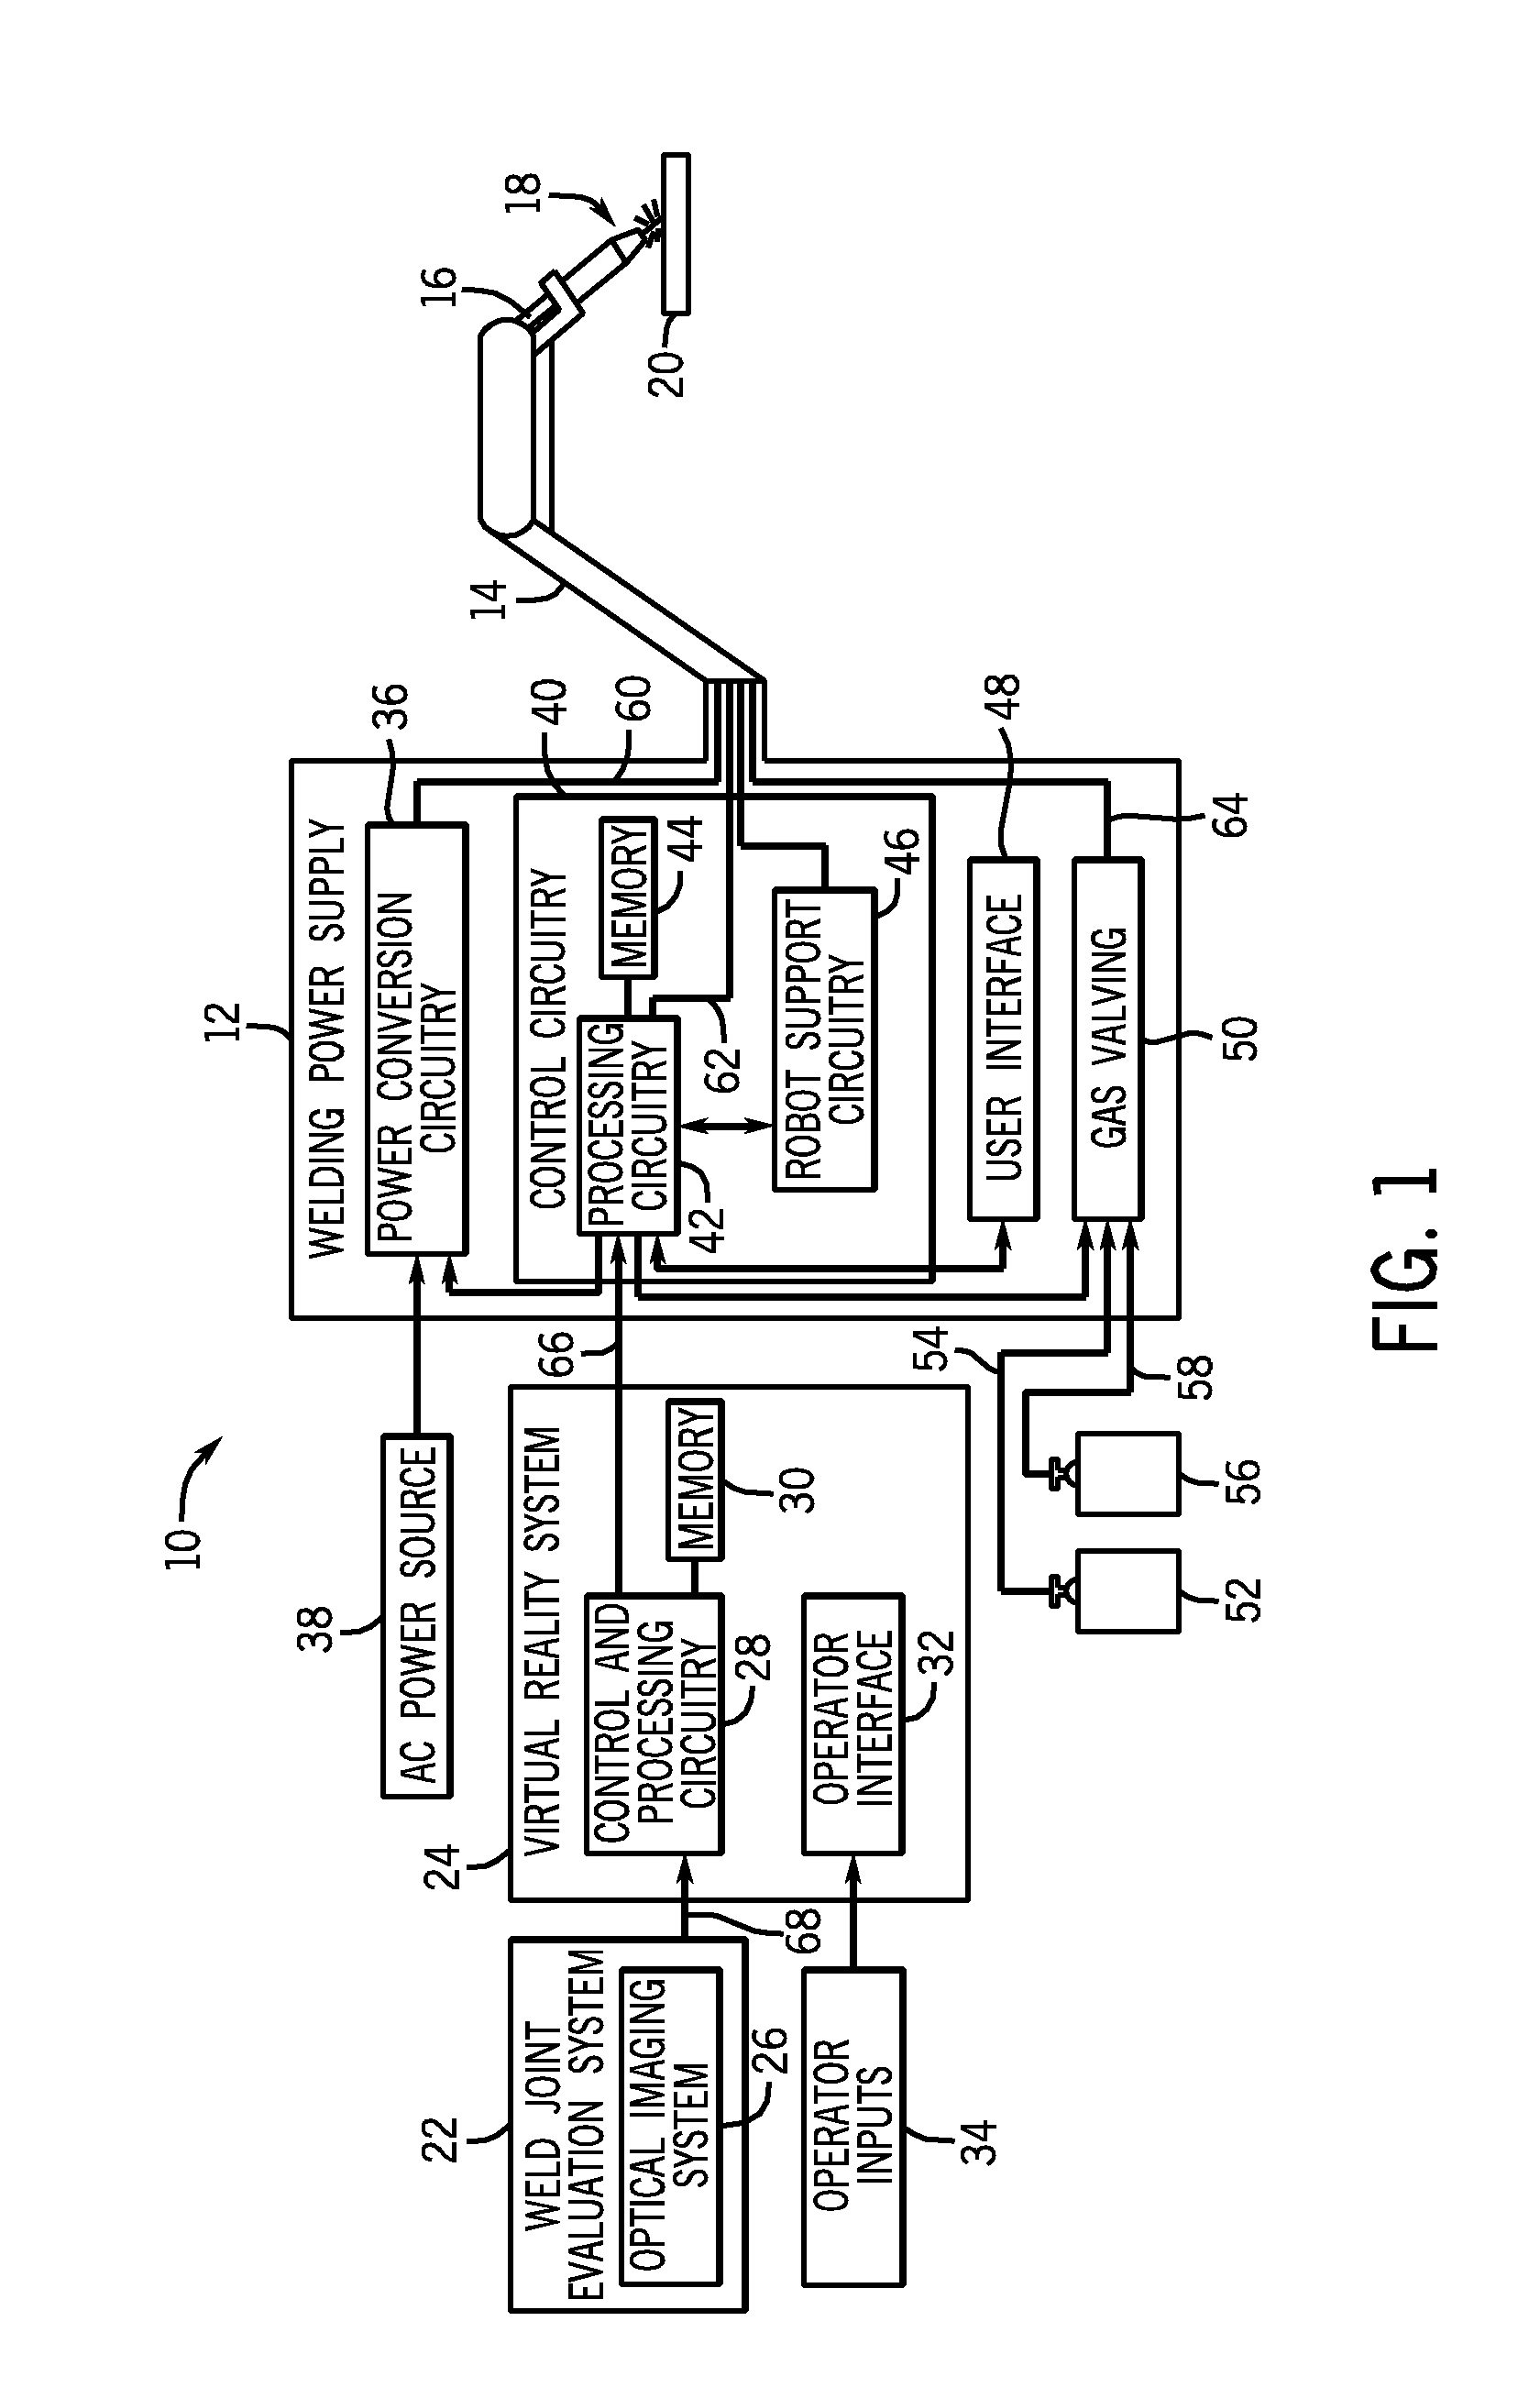 Automatic and semi-automatic welding systems and methods